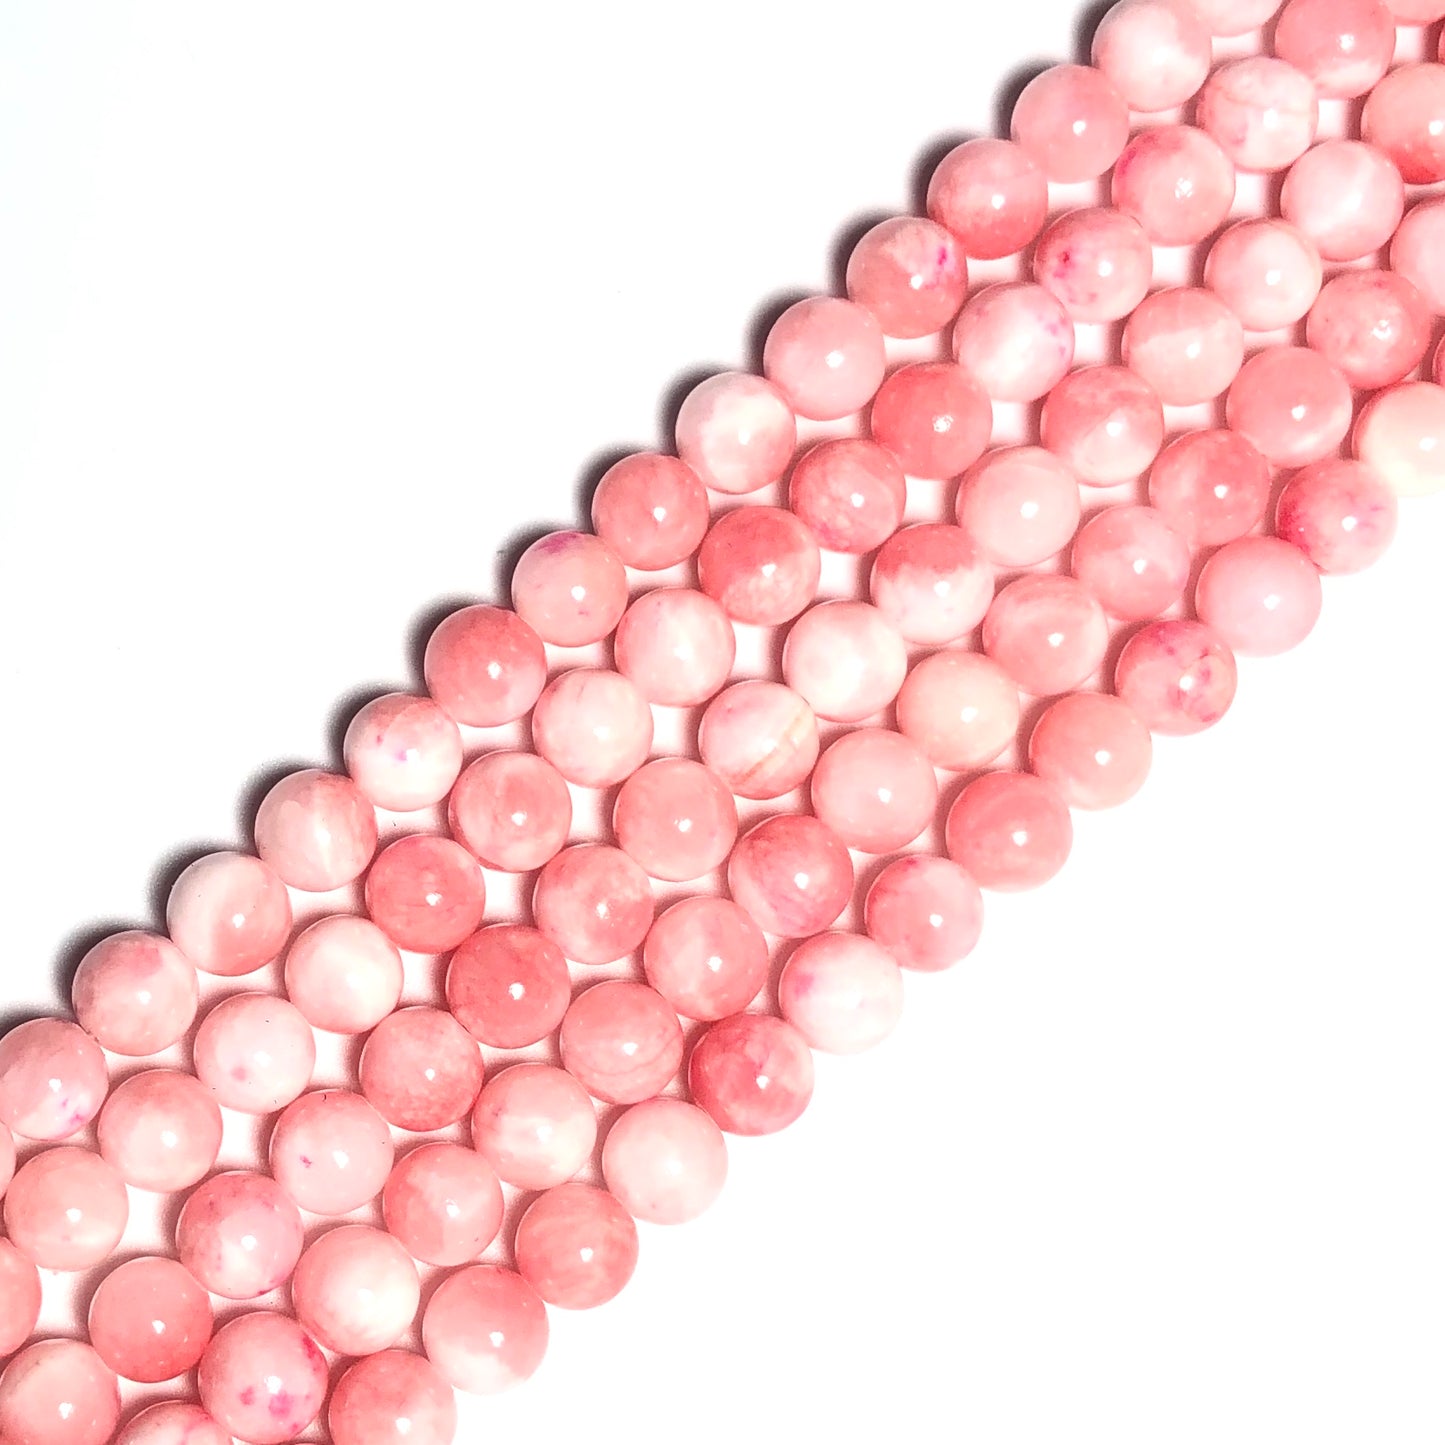 2 Strands/lot 8mm, 10mm Natural Pink Jade Round Stone Beads Stone Beads 8mm Stone Beads Round Jade Beads Charms Beads Beyond